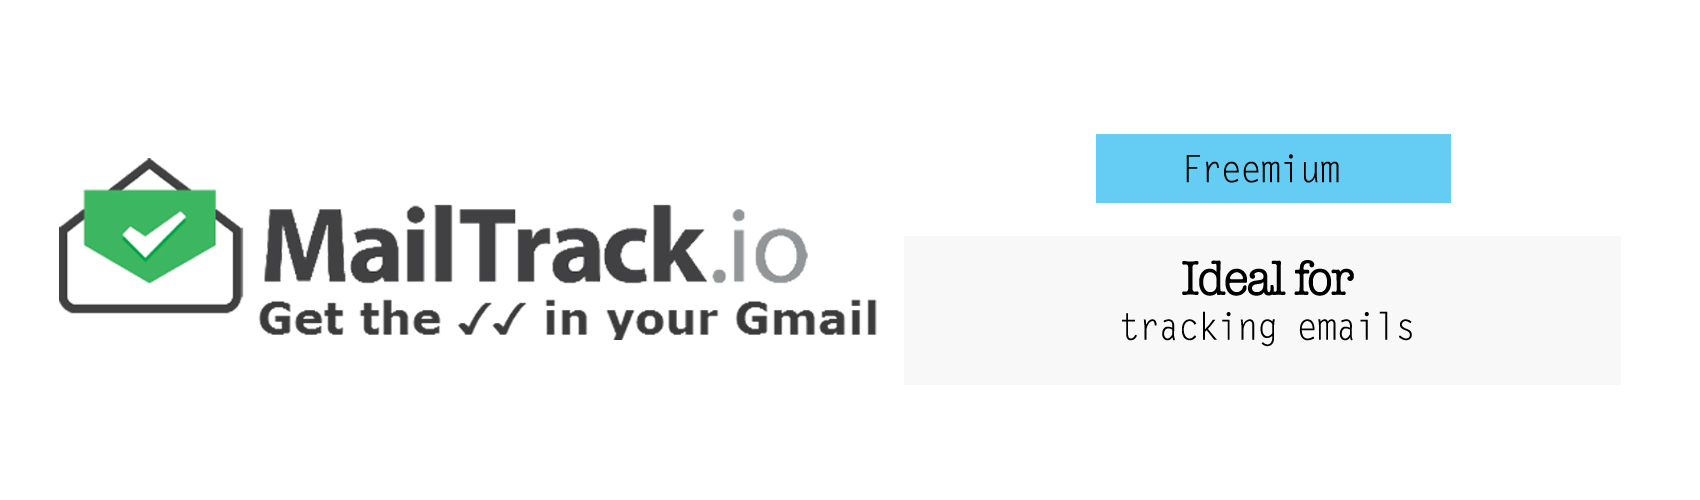 mailtrack.io for tracking emails